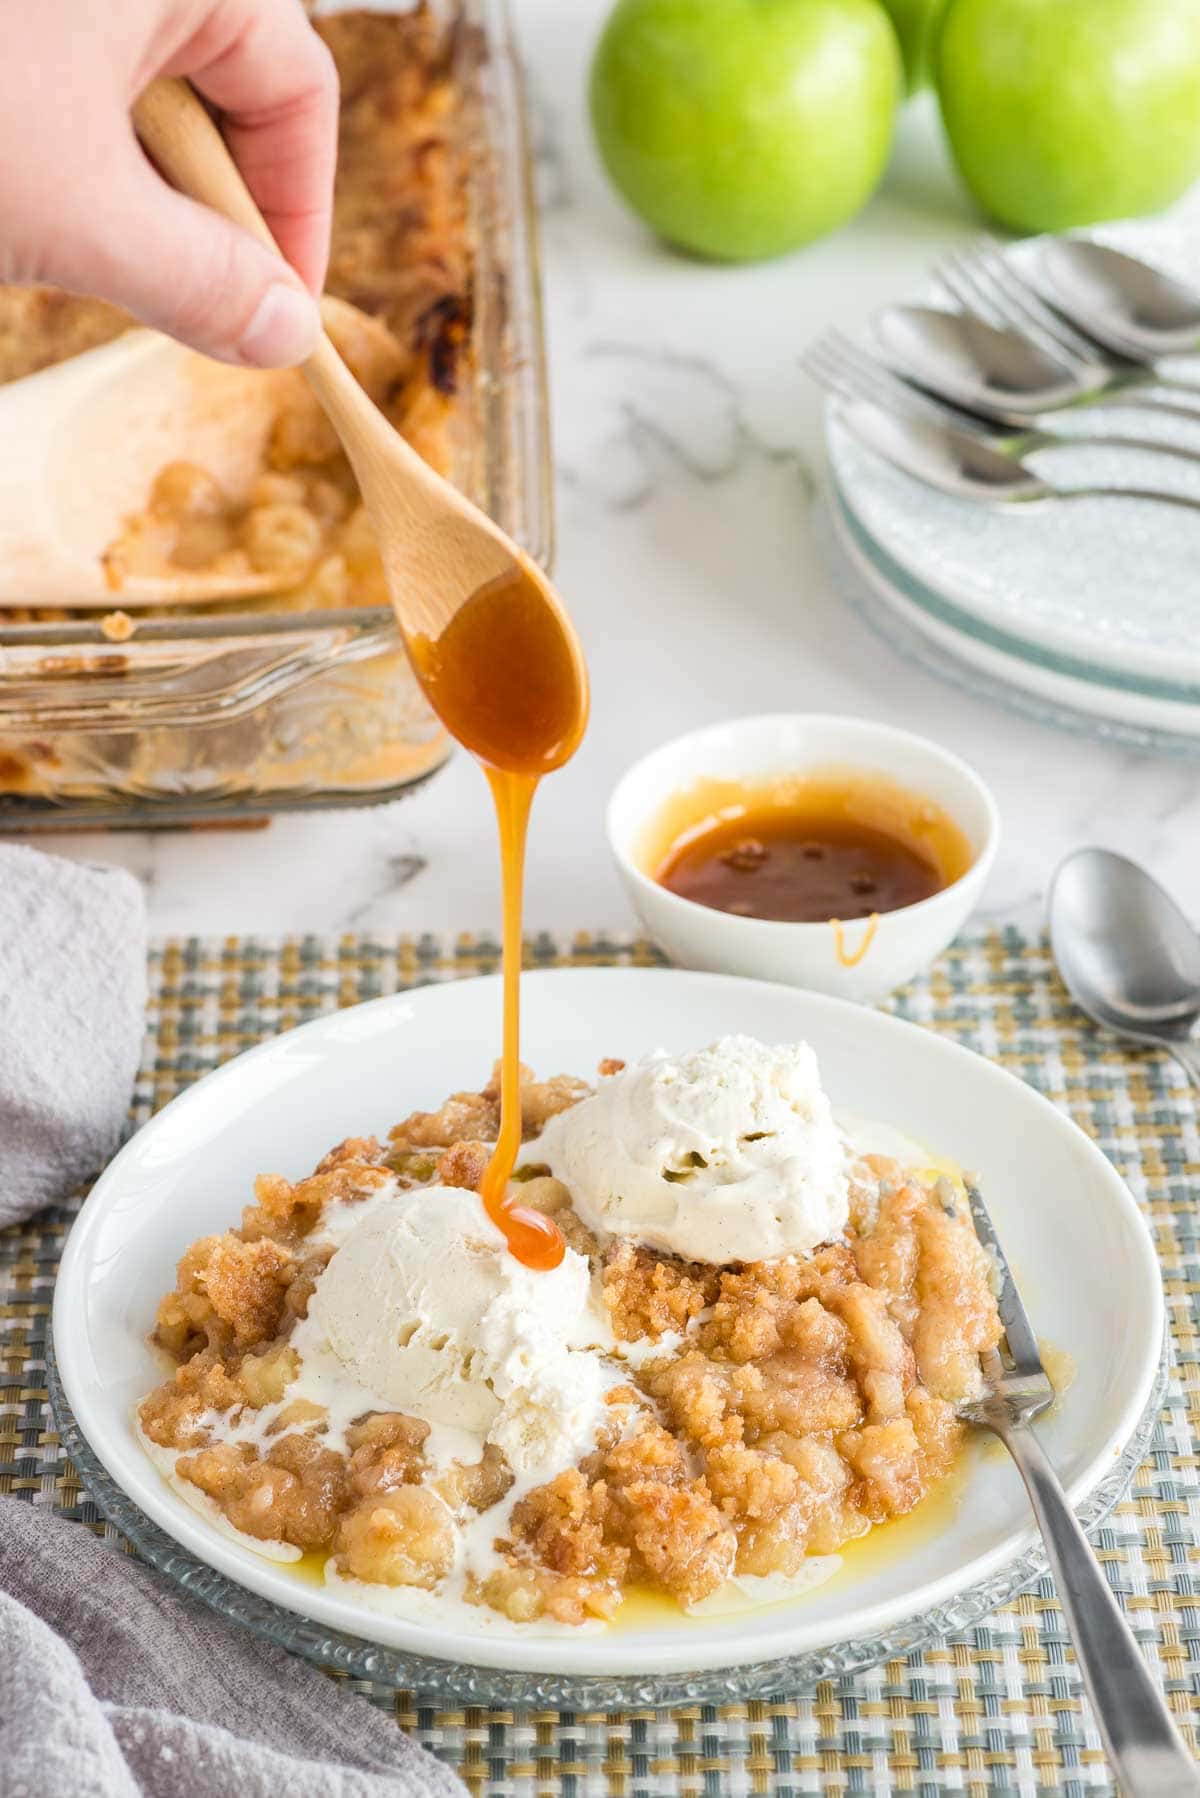 Apple crisp in white bowl with vanilla ice cream and caramel drizzle.